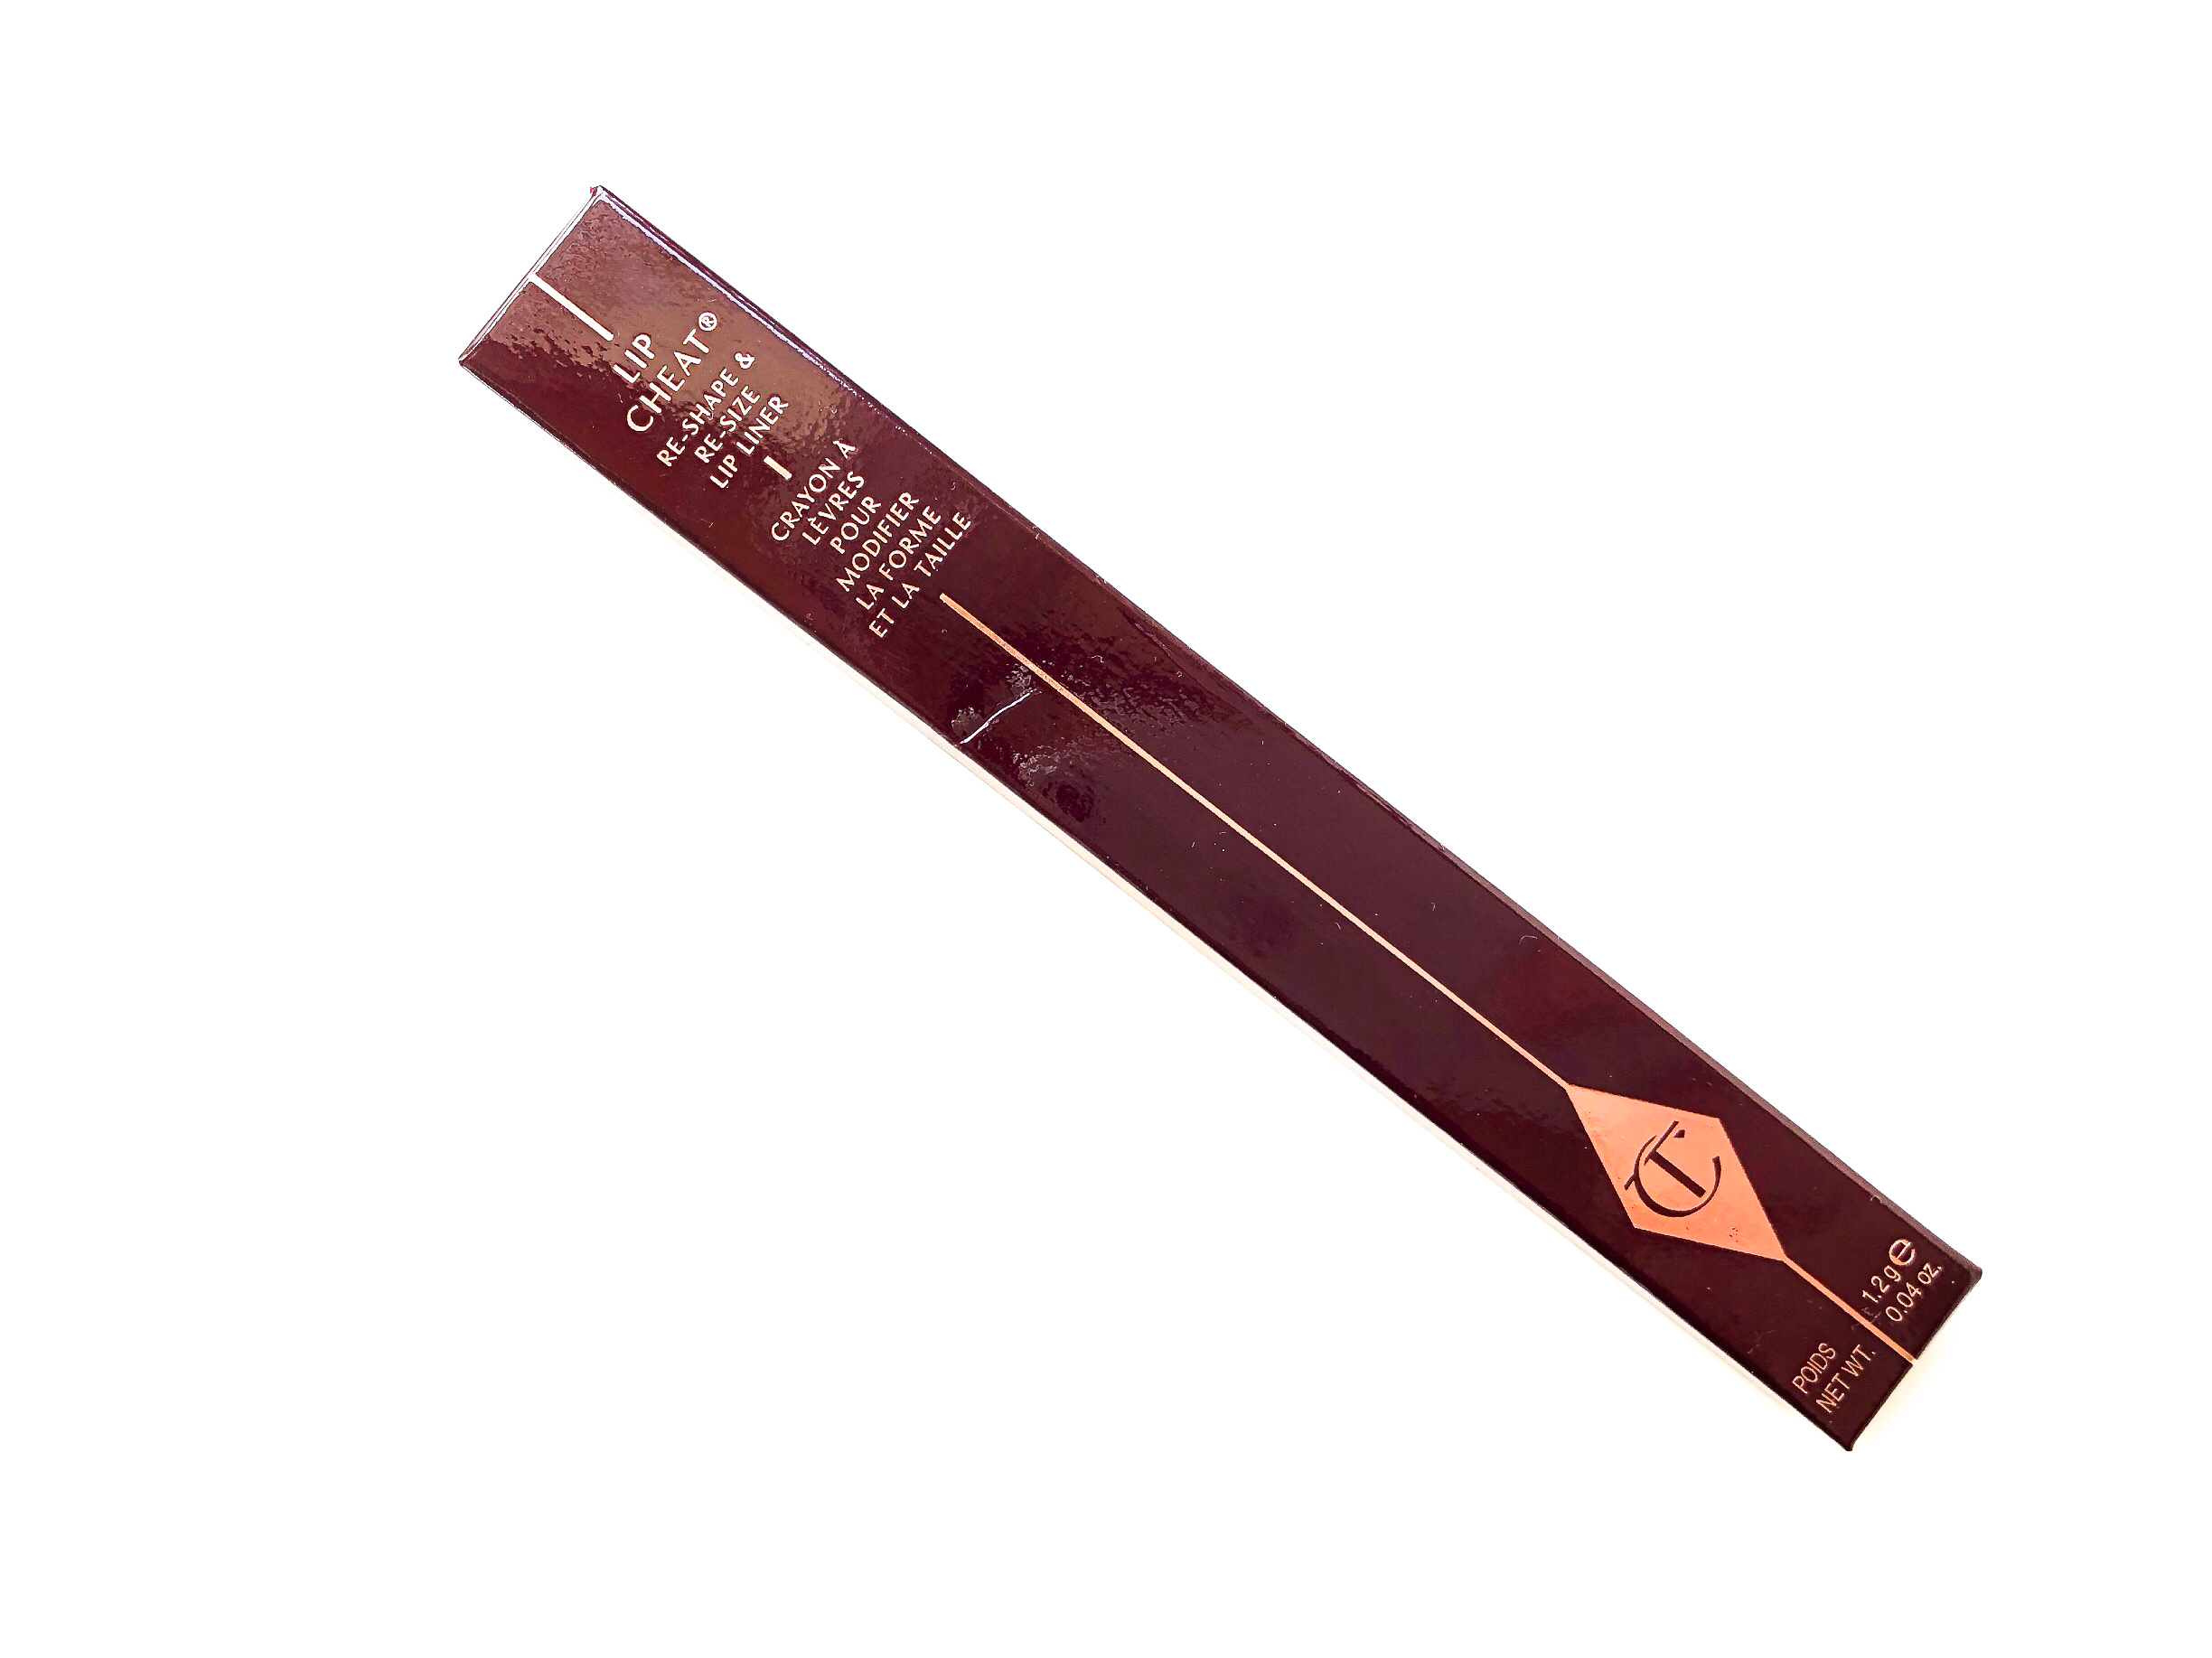 Charlotte Tilbury Lip Cheat in Pillow Talk review and swatch